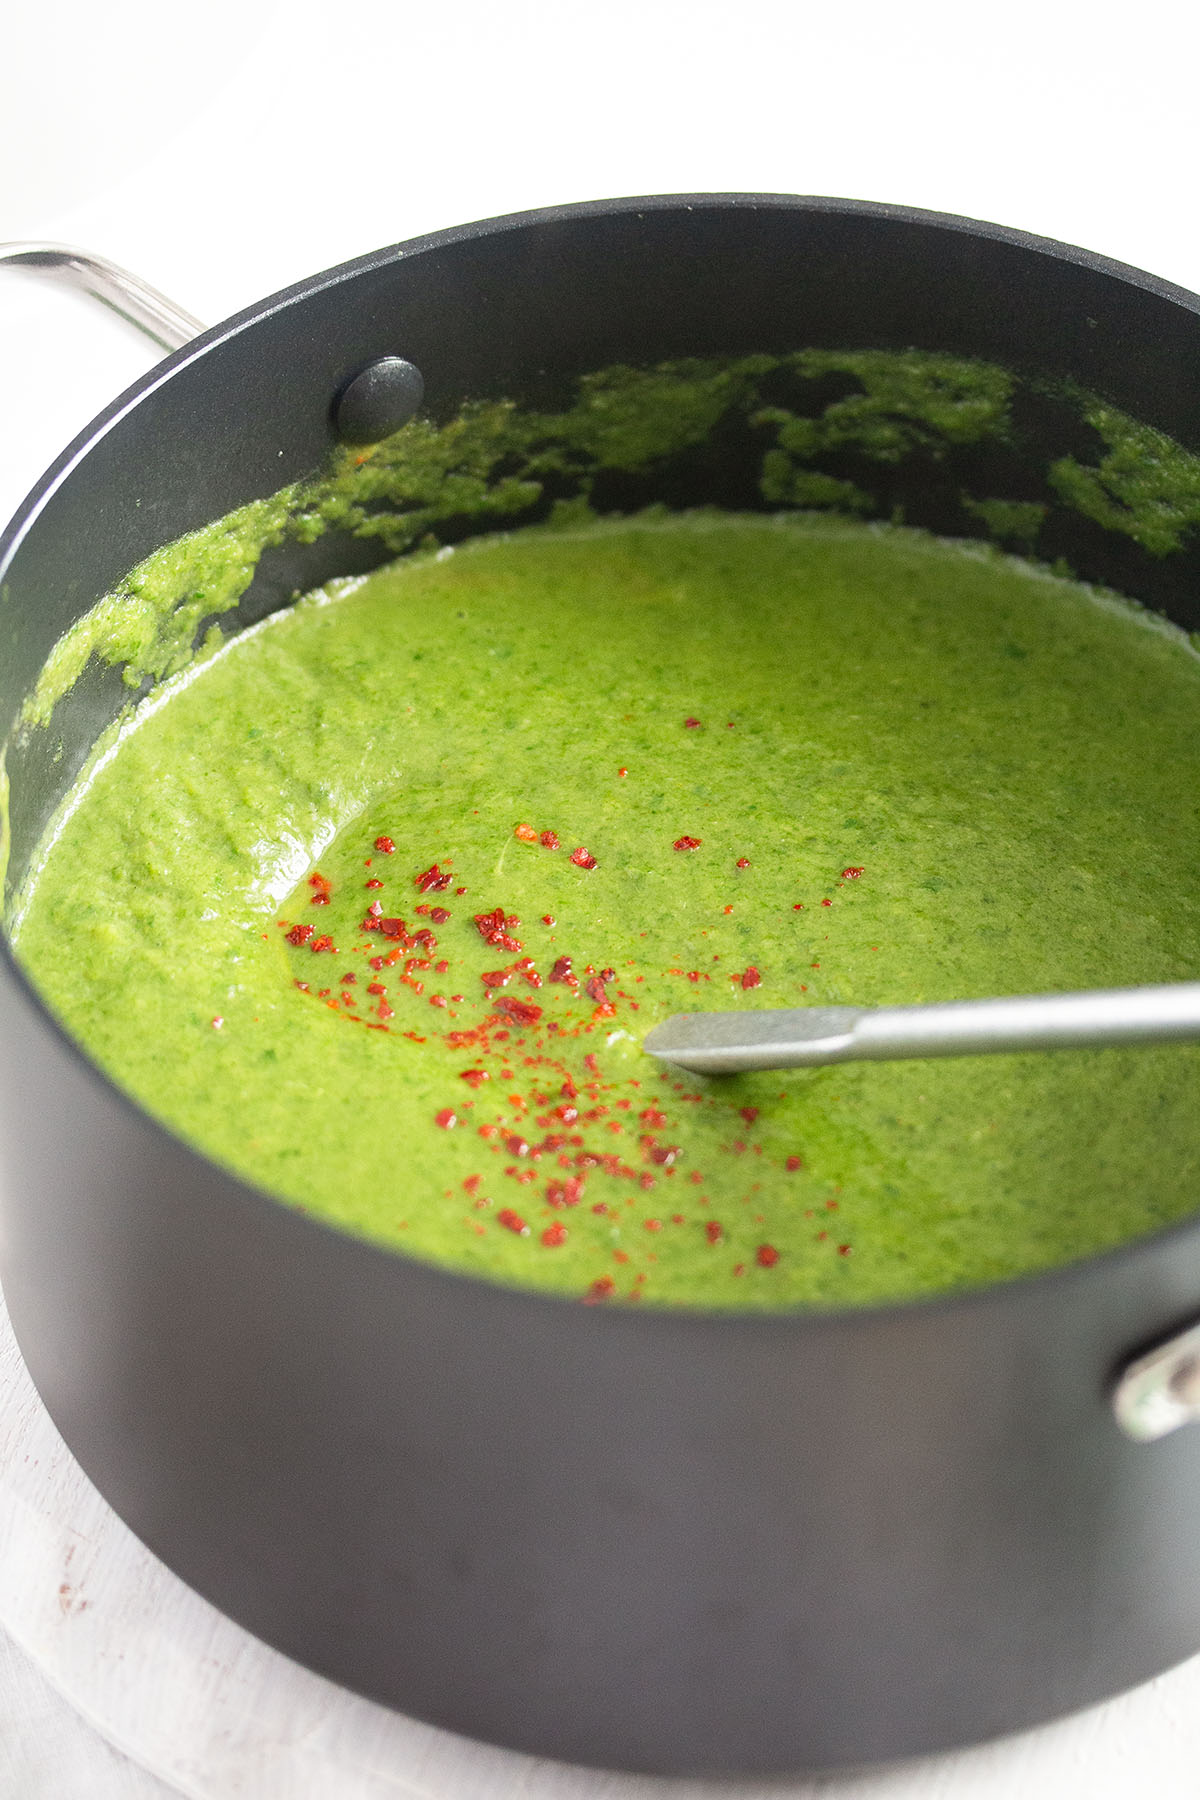 full pot of green vegan broccoli soup sprinkled with chili flakes.